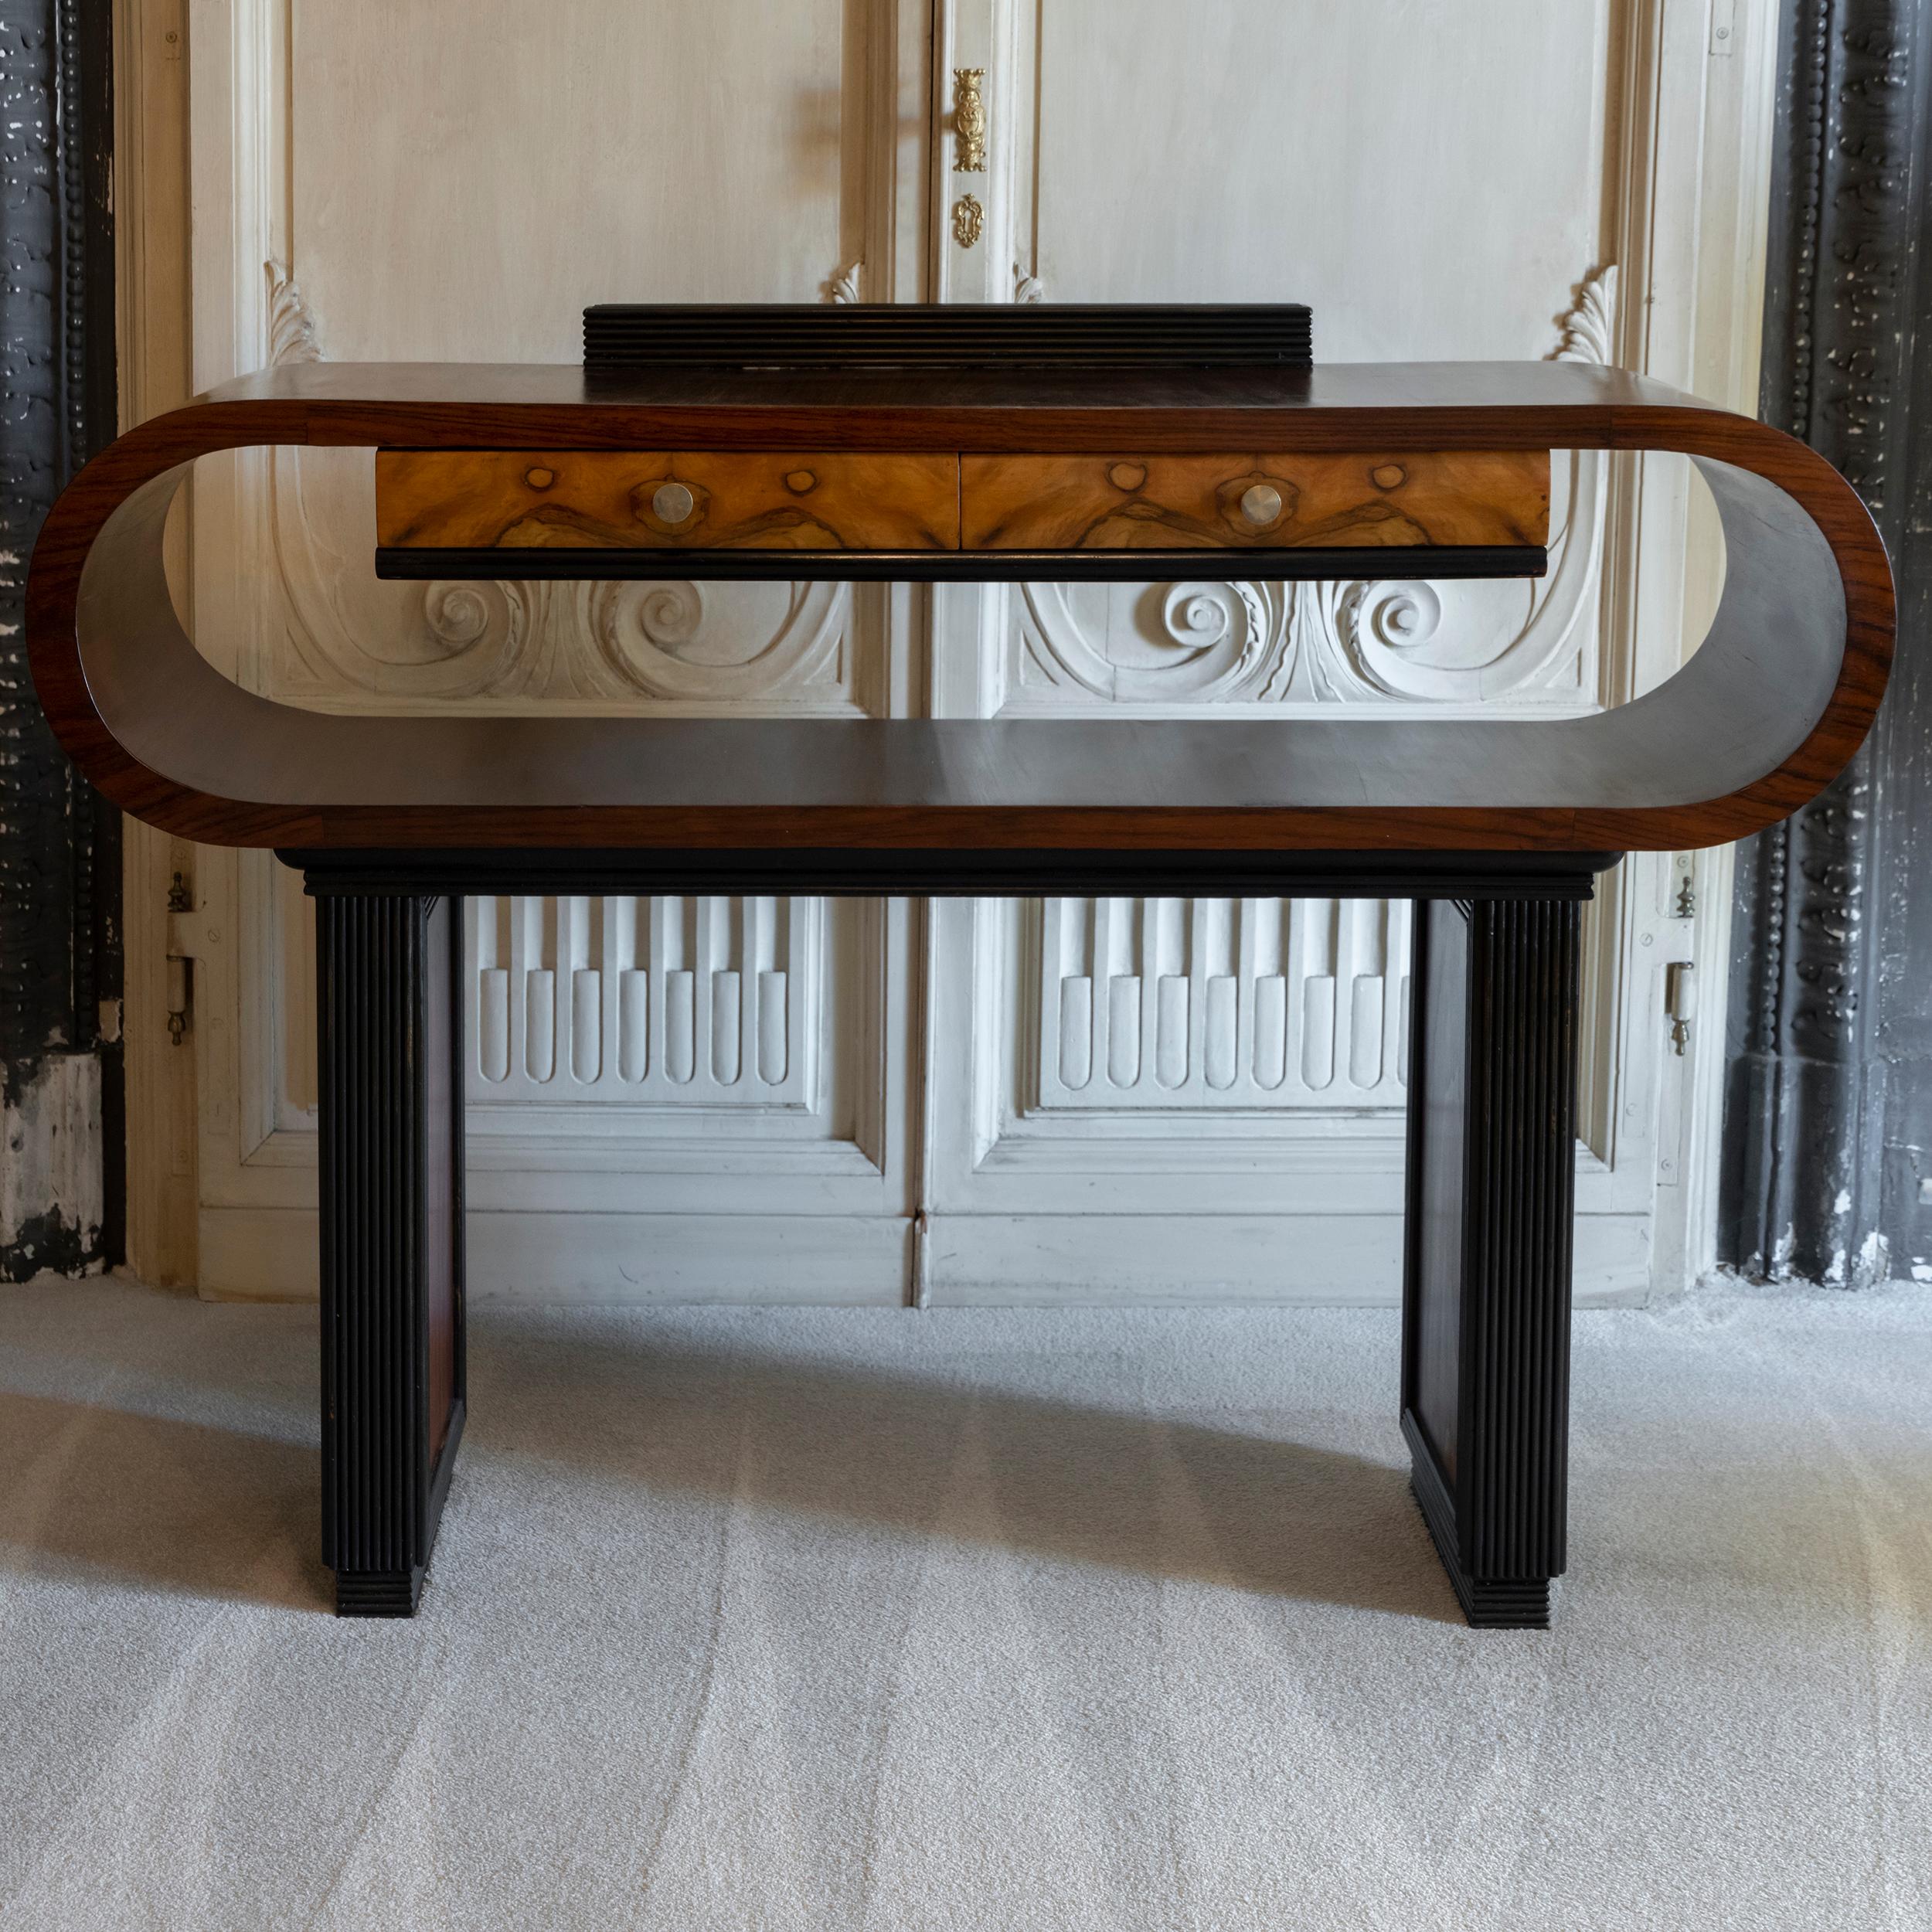 Art Deco console table in palisander, mahogany and walnut, channeled decorative details, two drawers with burlwood front, brass details, Italy 1930s circa.